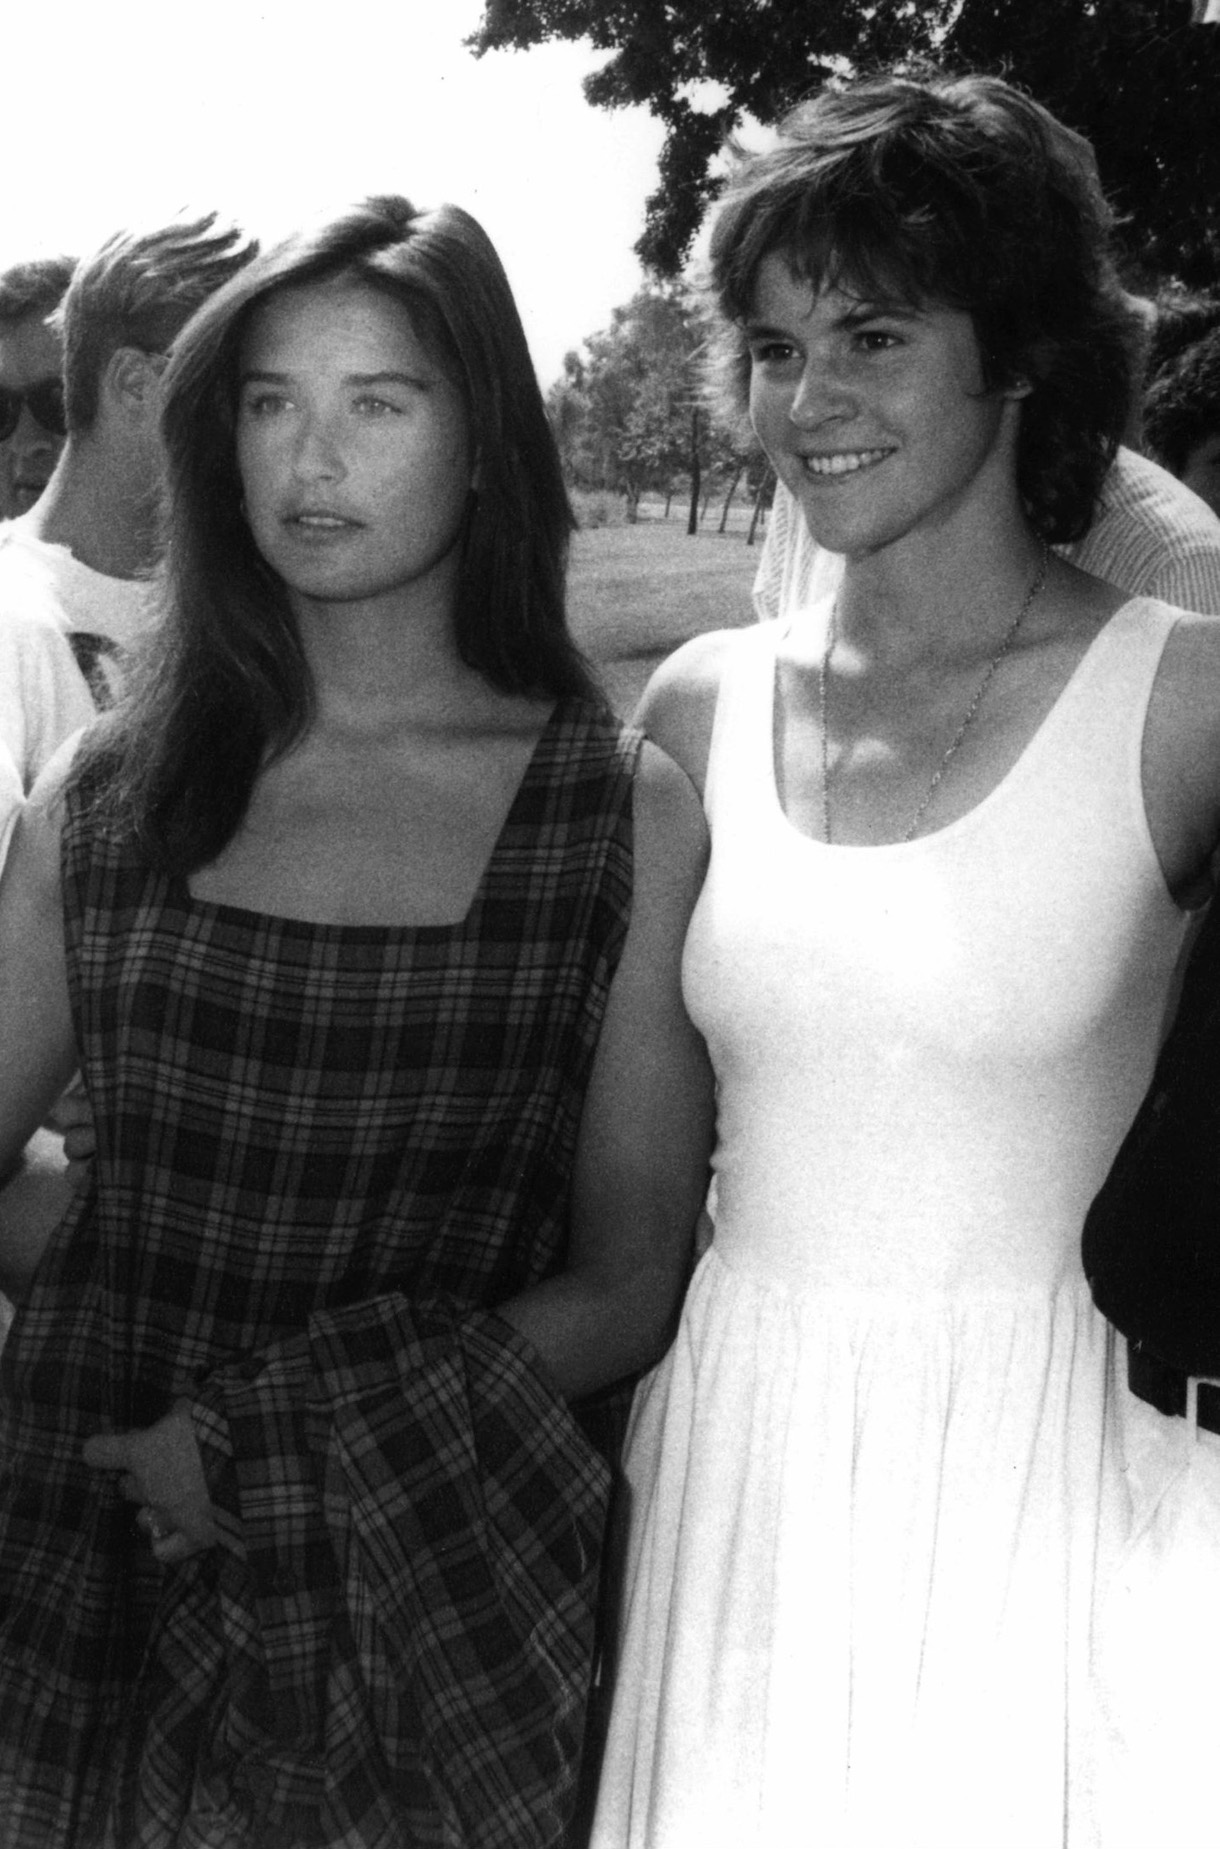 Alley Sheedy and Demi Moore attending a pro-peace rally in Los Angeles in 1984